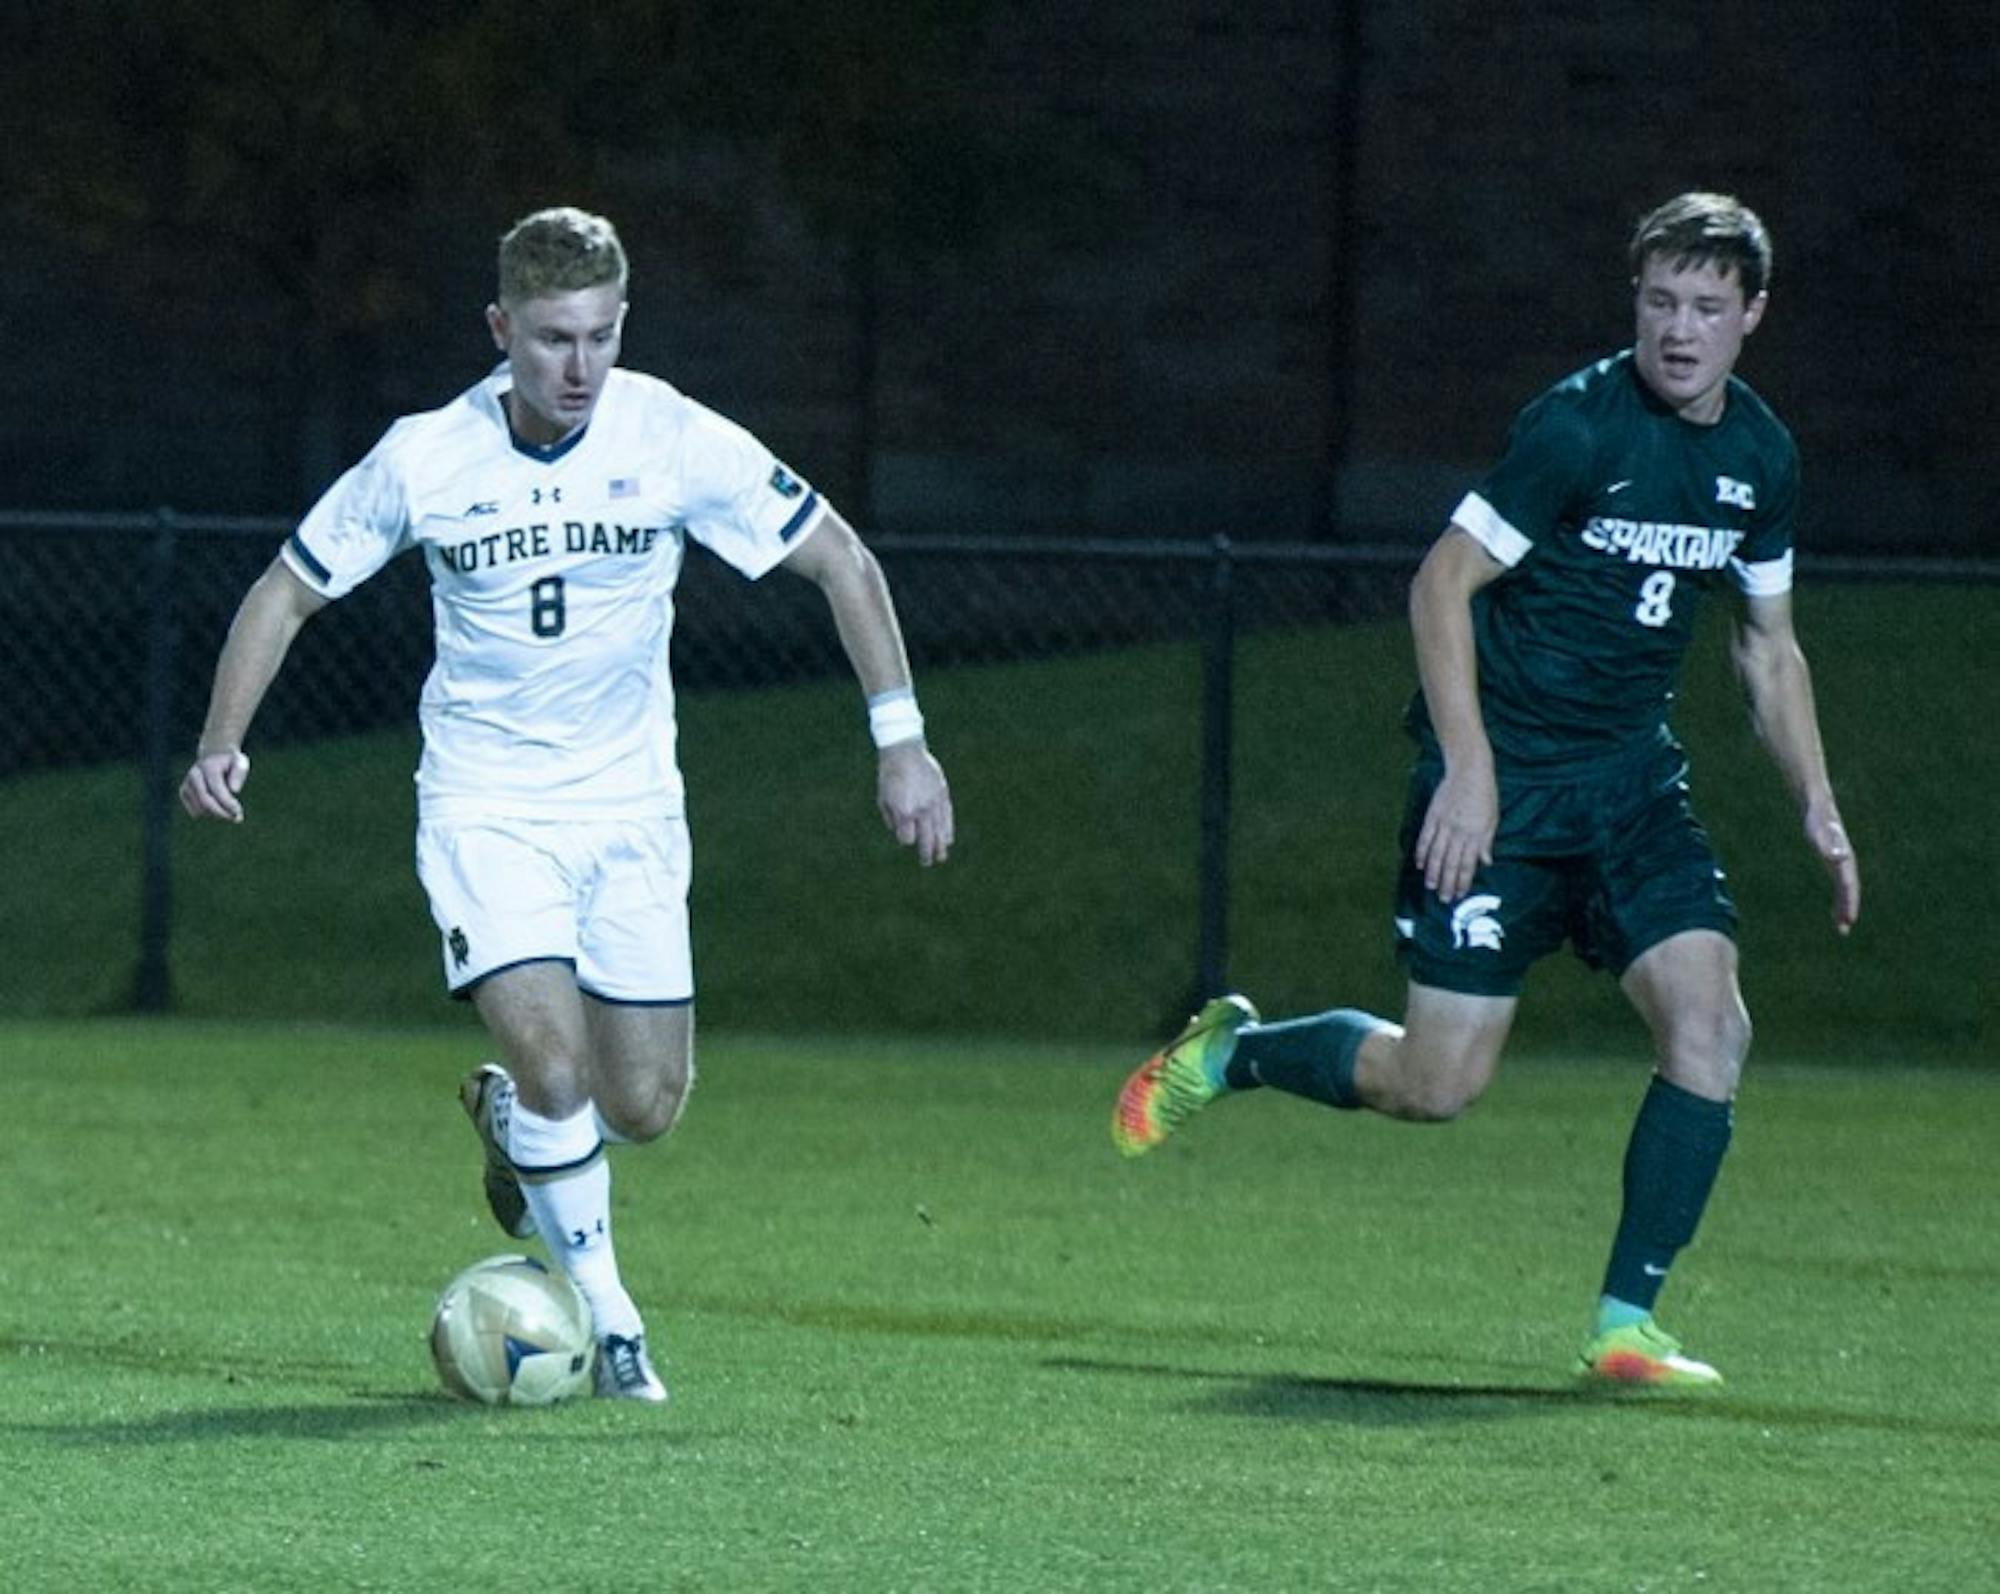 Irish junior forward Jon Gallagher dribbles the ball in Notre Dame’s 1-0 loss to Michigan State on Tuesday at Alumni Stadium.